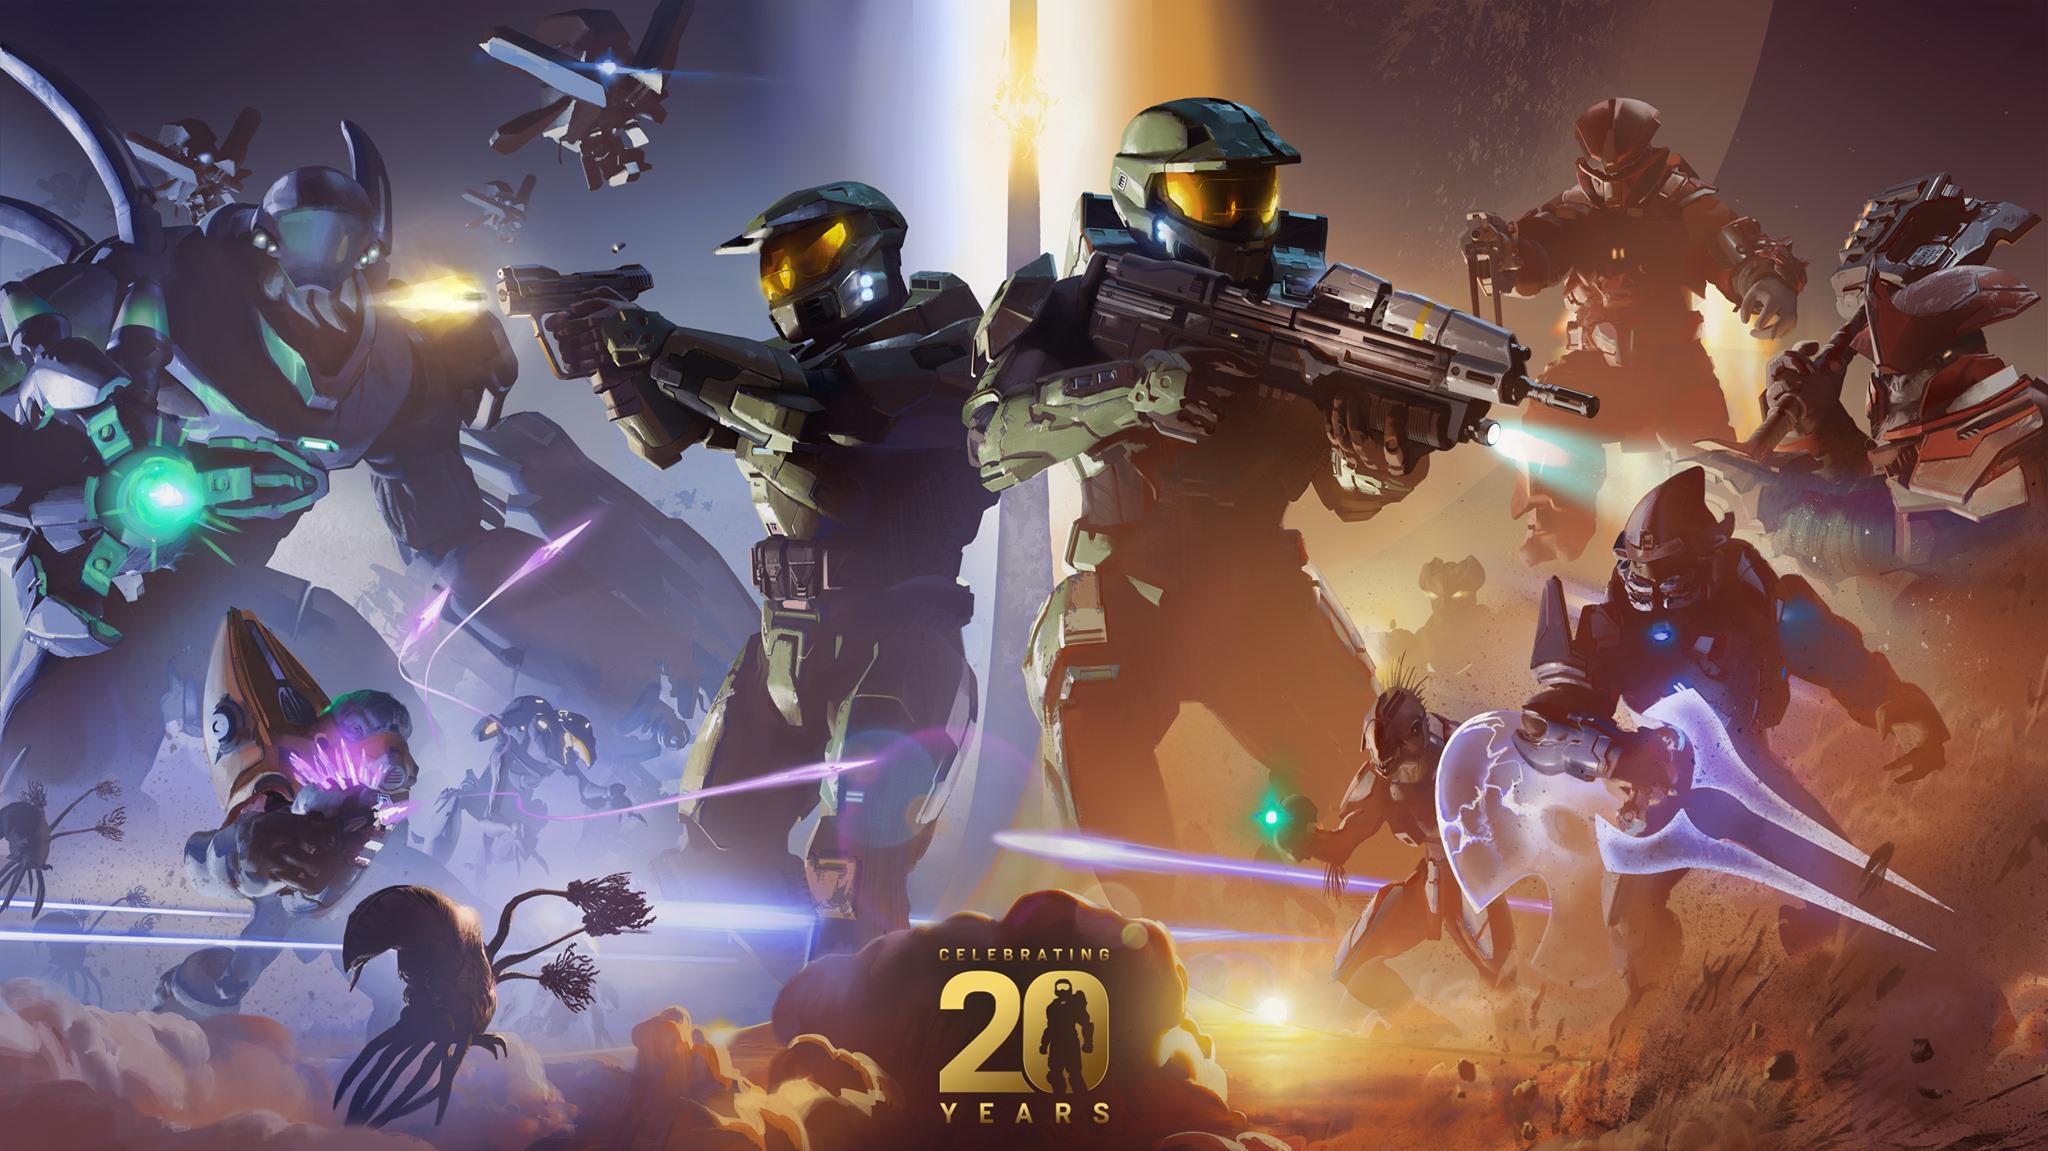 Halo   This year we celebrate 20 years of Halo Xbox and the